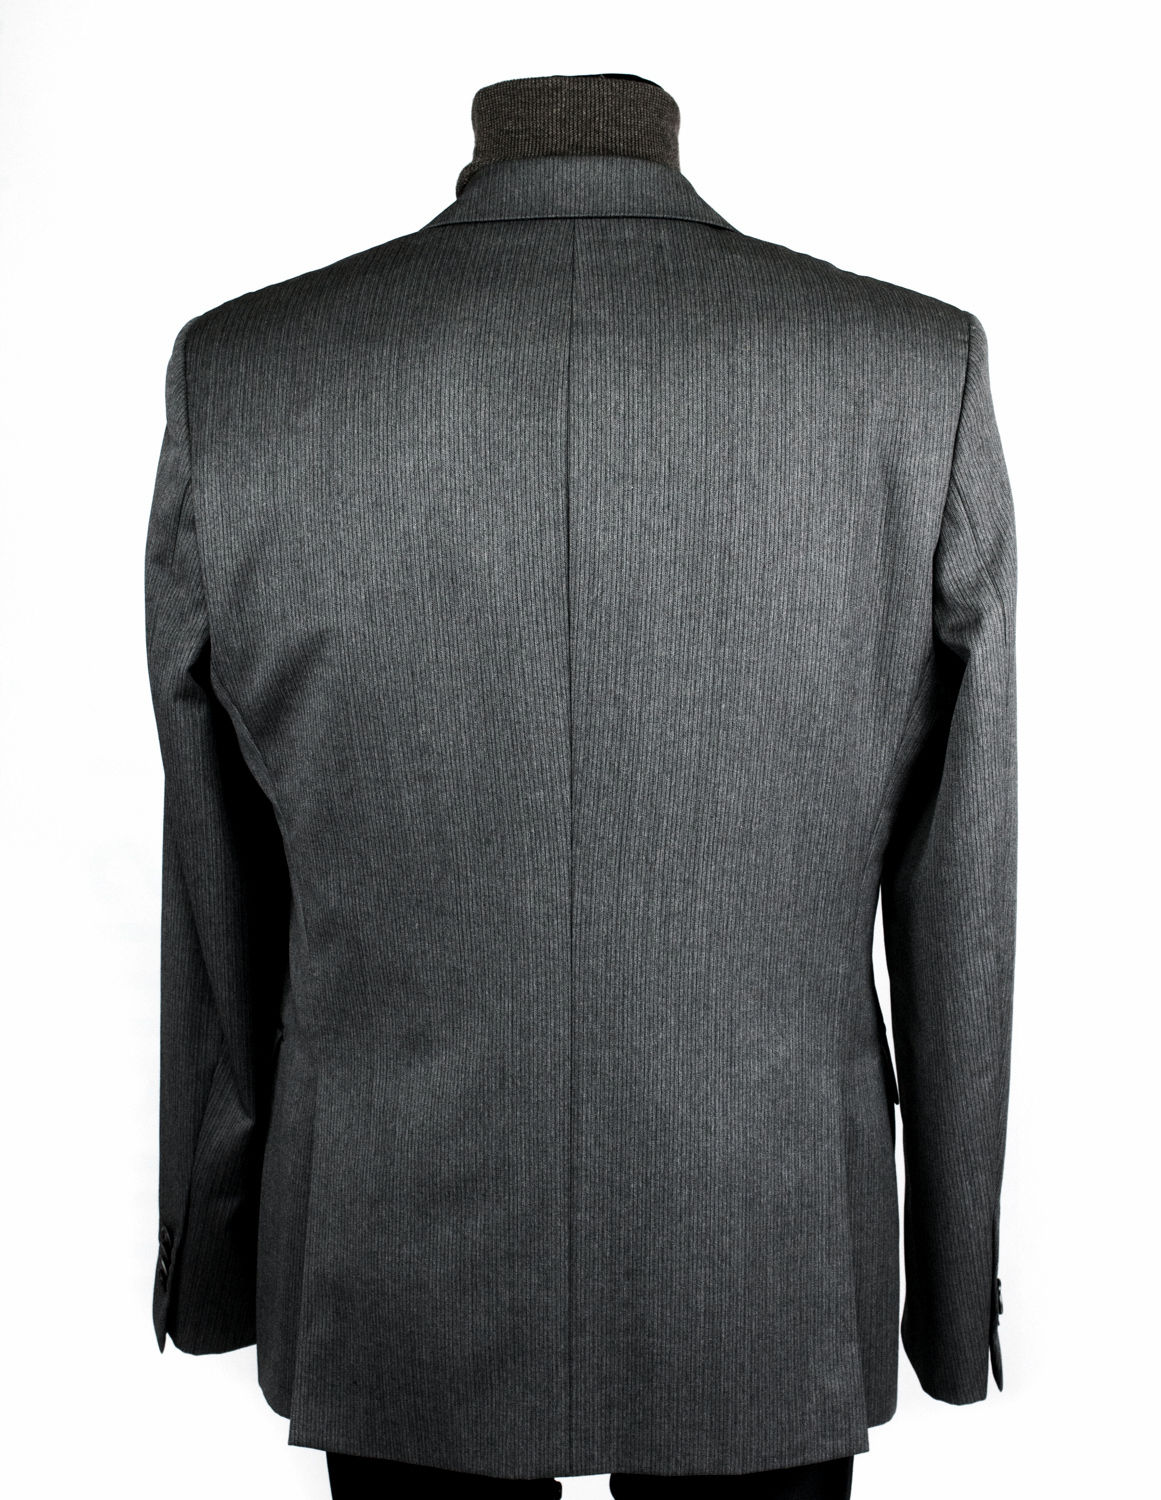 HUGO BOSS Selection Super 130's Wool Blazer USA 38L, EUR 94 - secondfirst